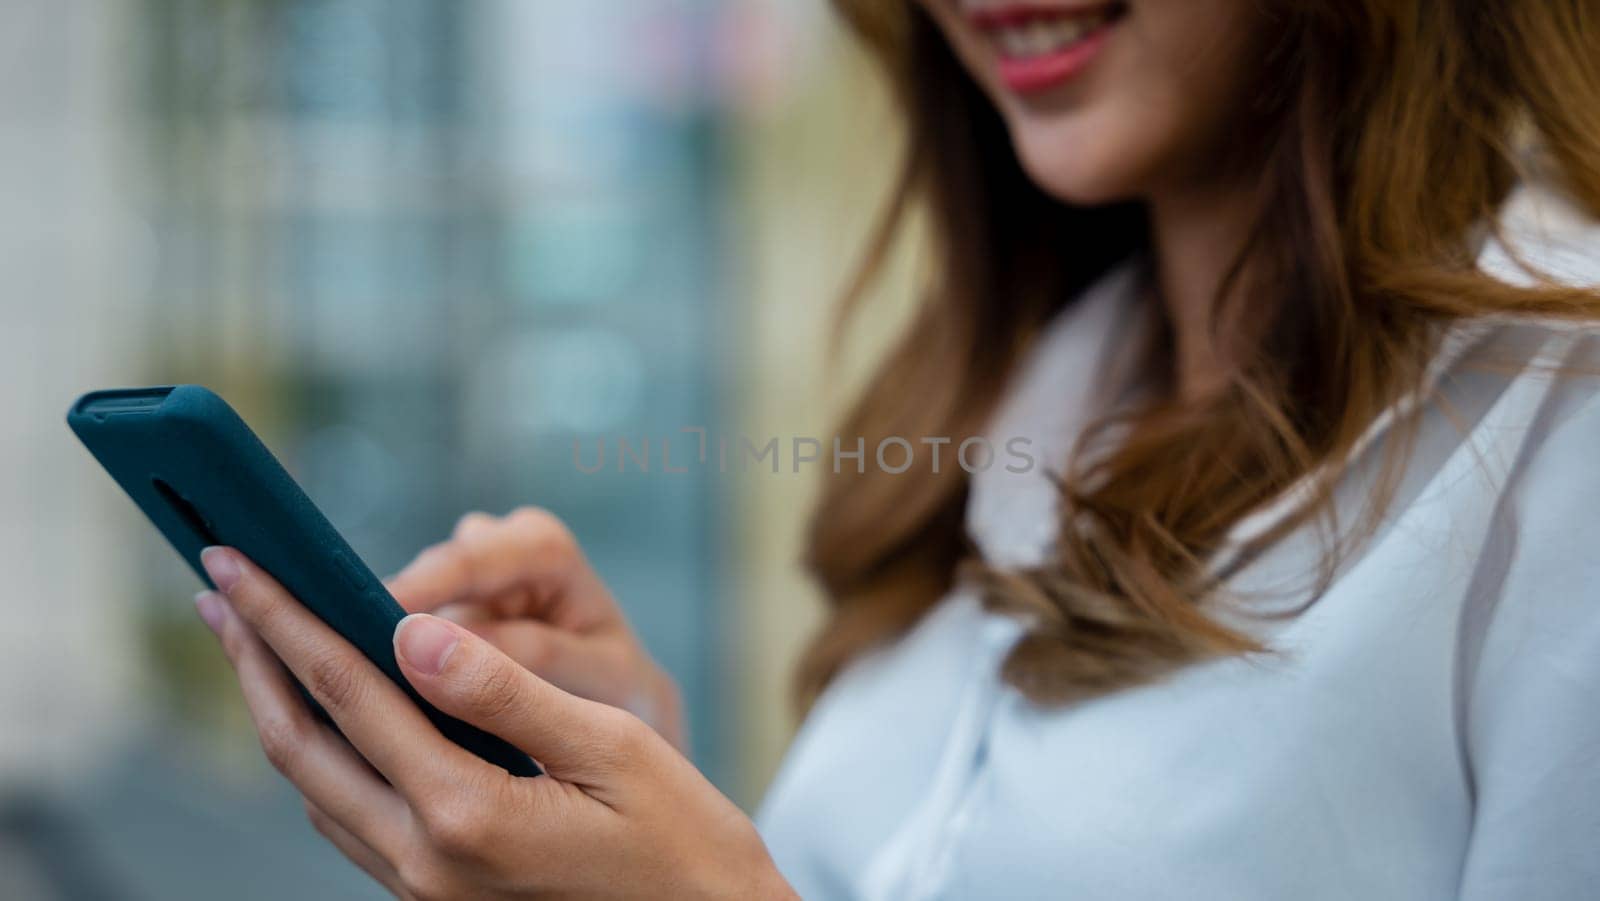 A woman in a white shirt typing a message on her smartphone. The device is an essential tool for modern communication and digital lifestyle, offering connectivity and convenience.